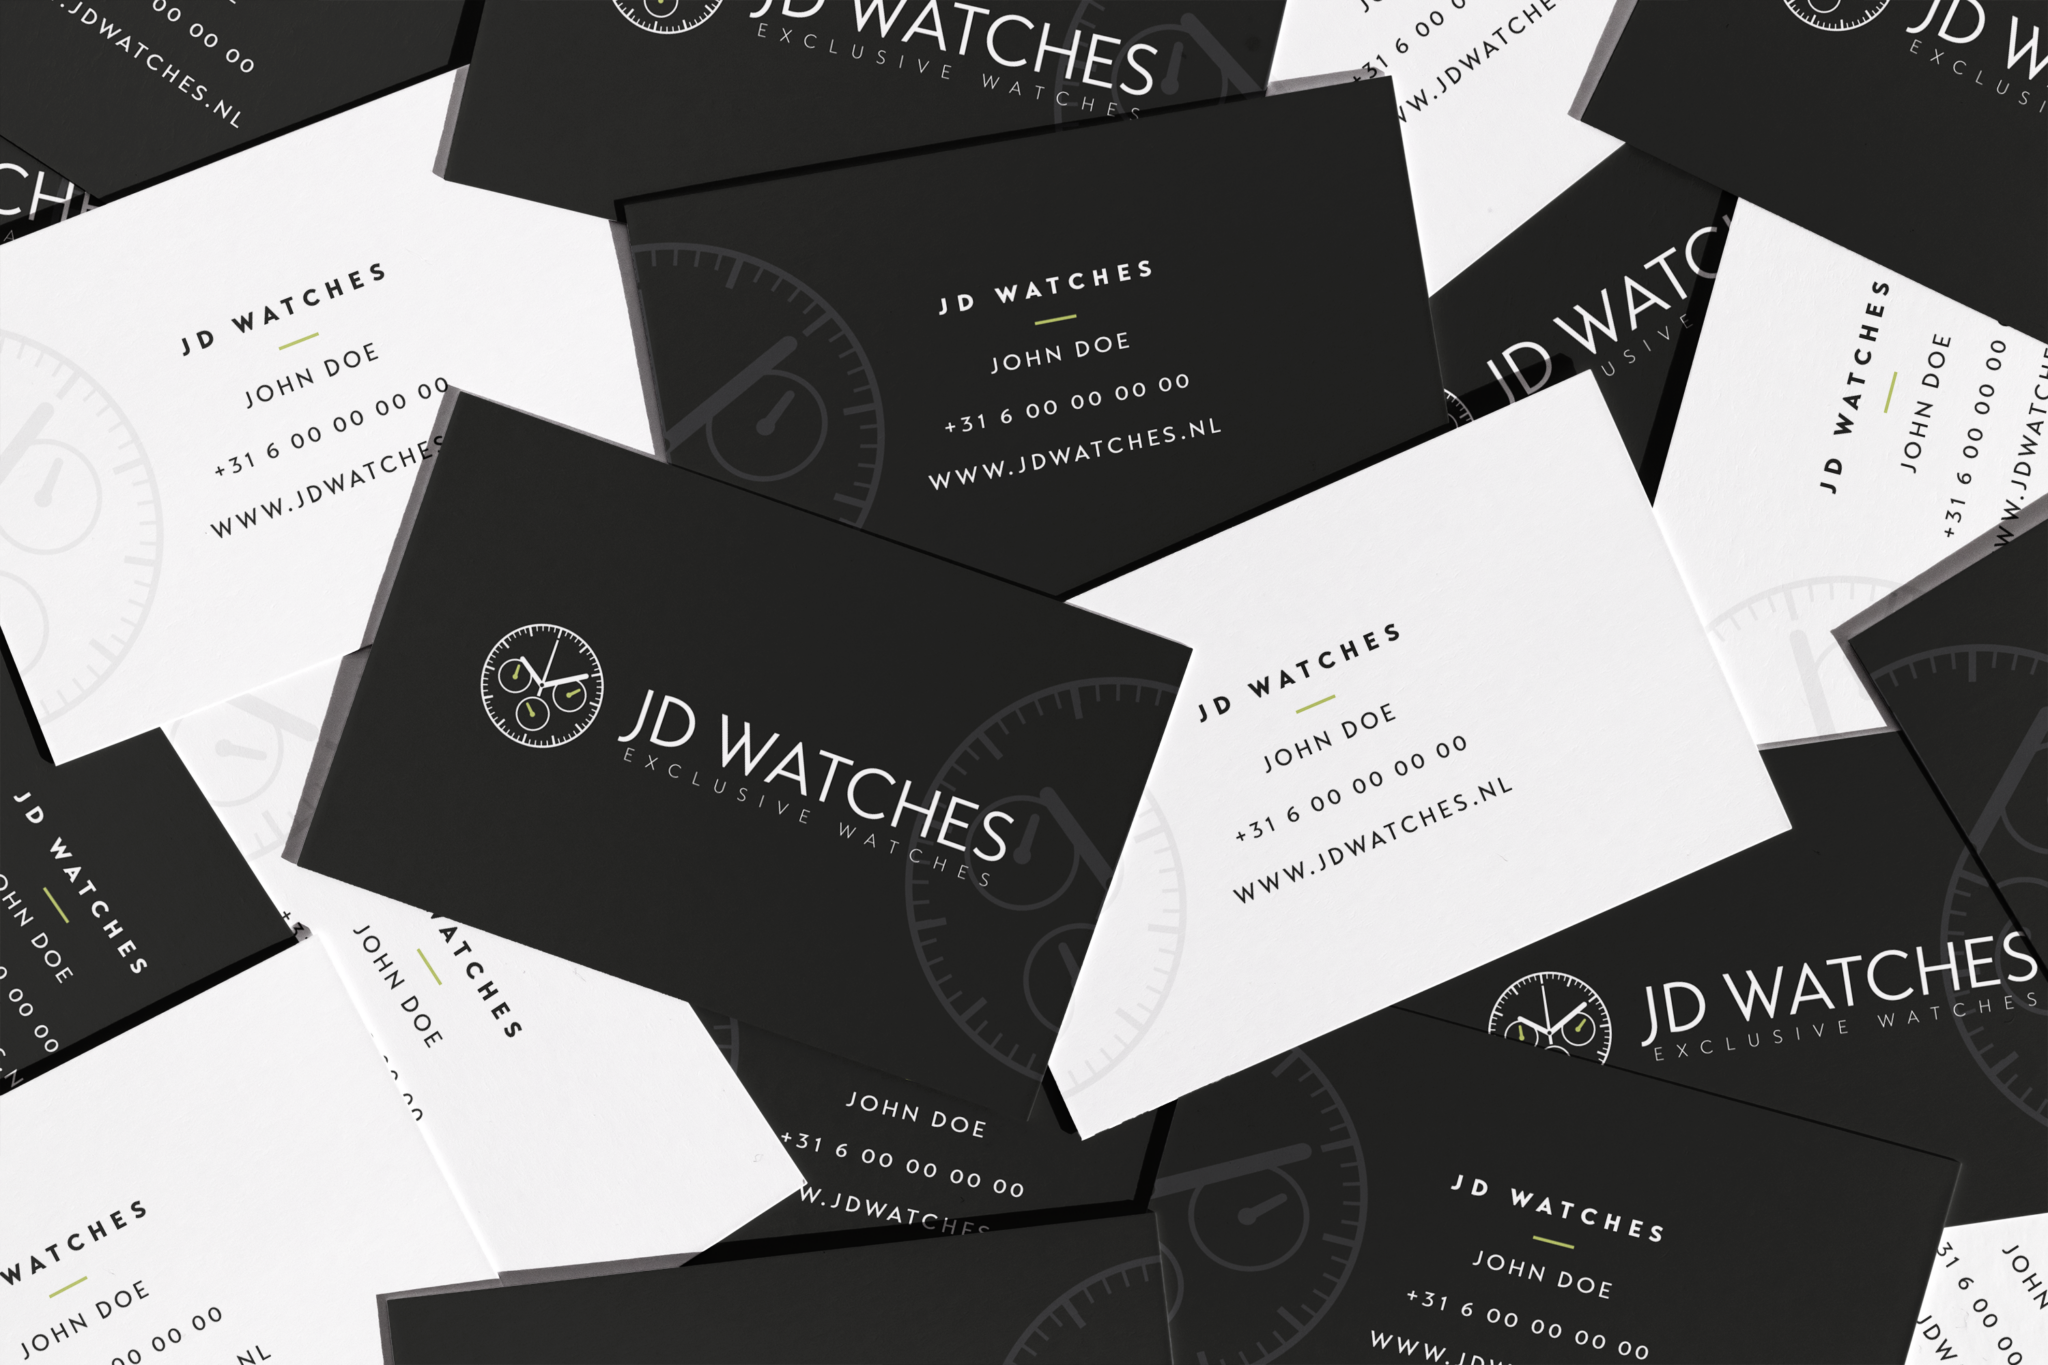 jd-watches-visite1